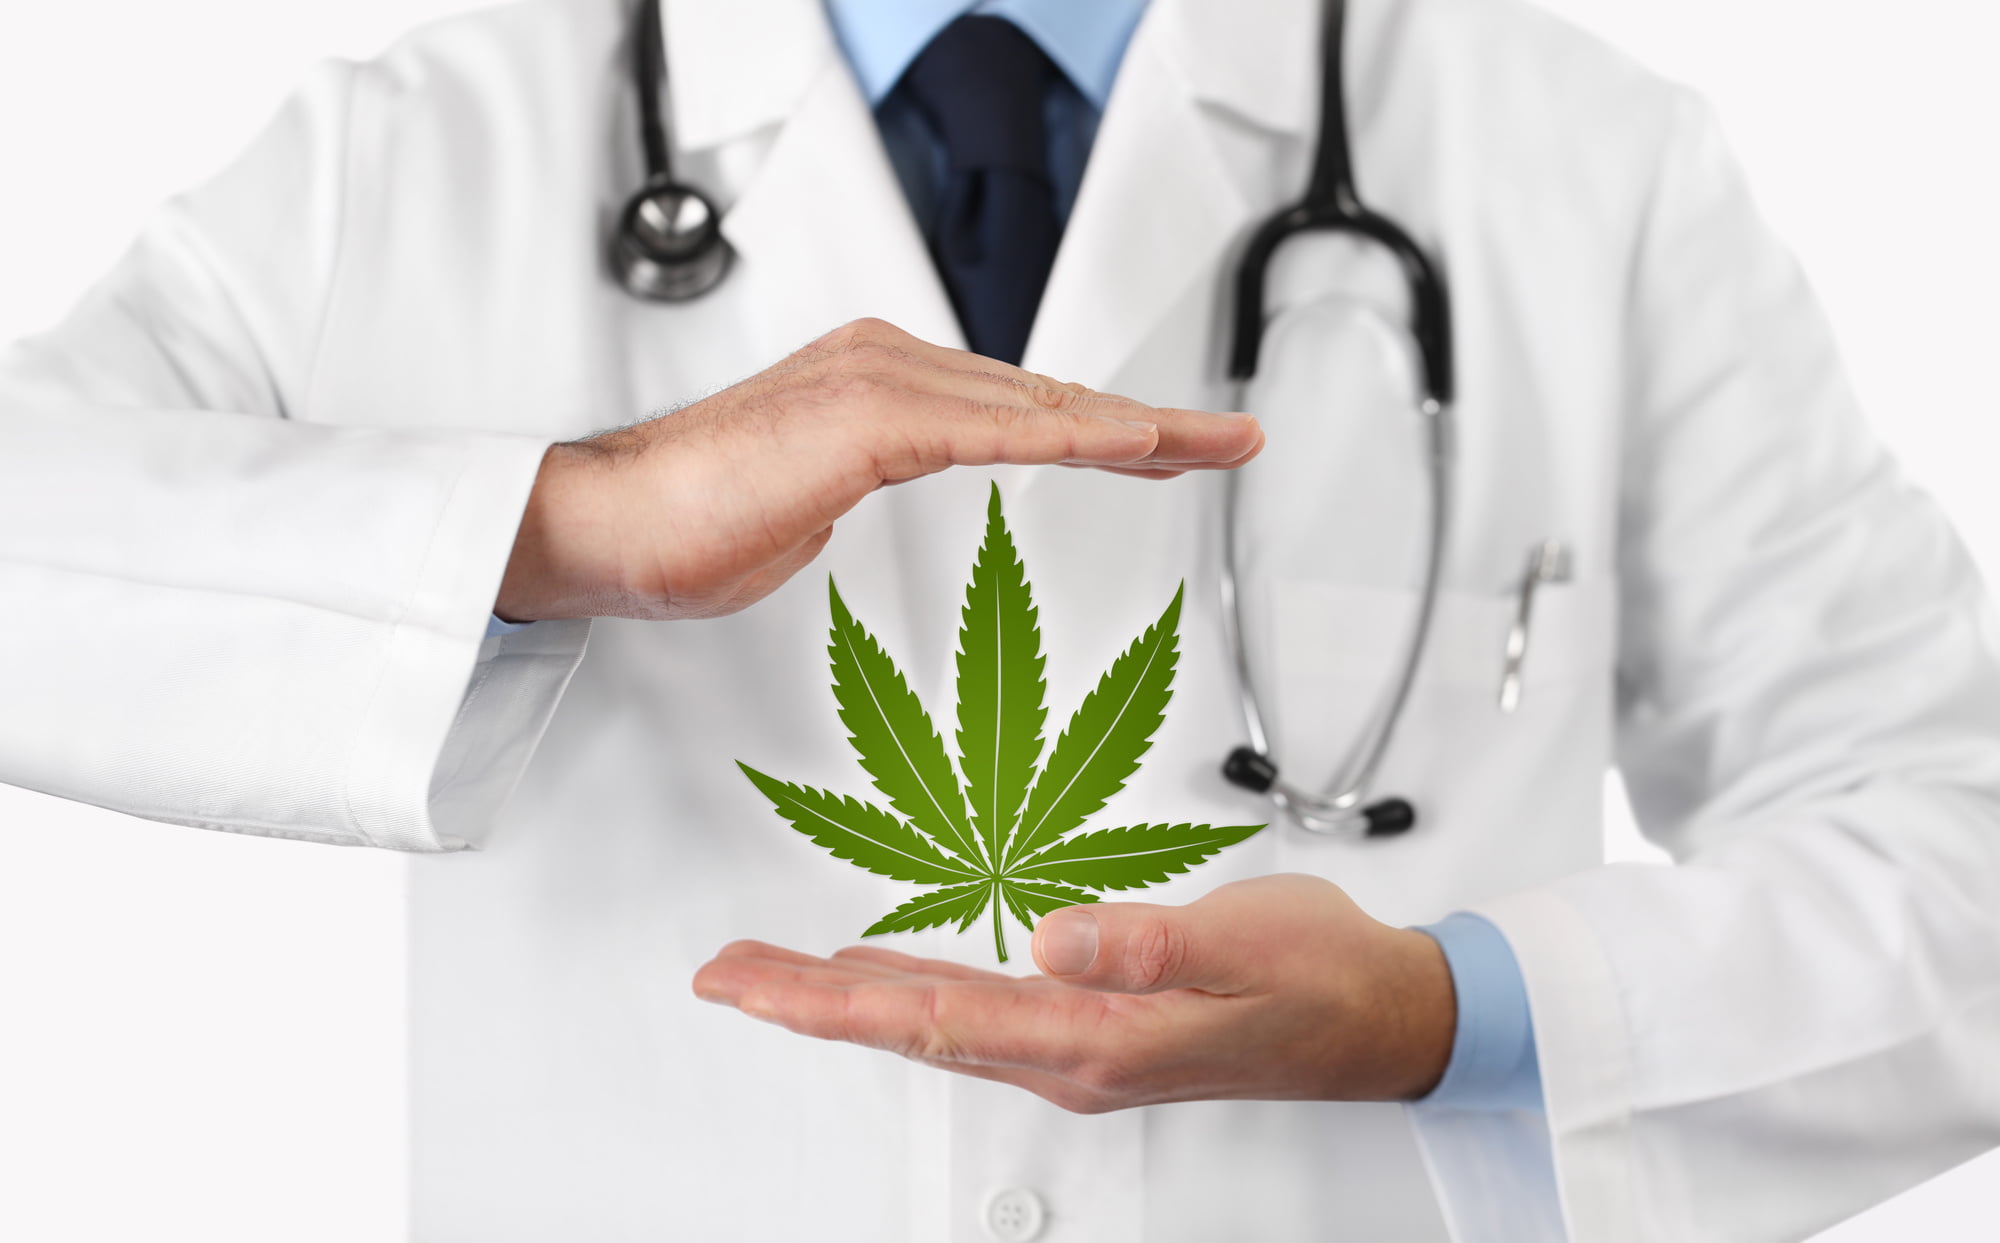 Medical Cannabis for Pain Management